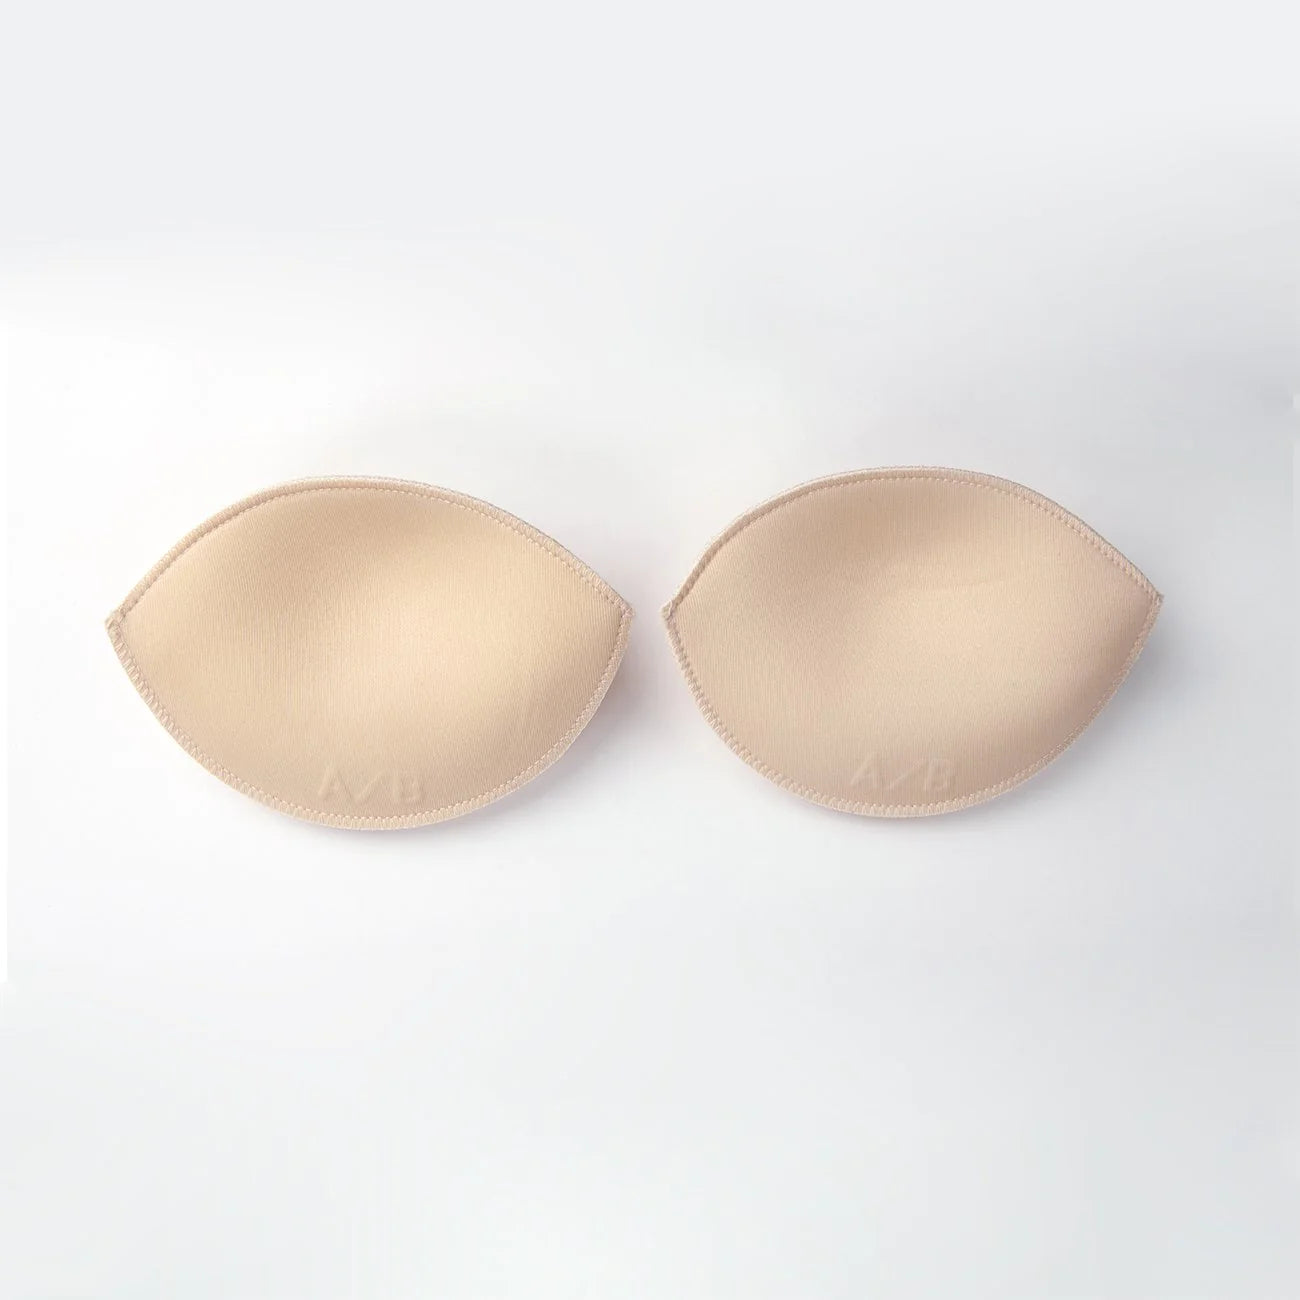 Water Push Up Pads - Nude - A/B, C/D